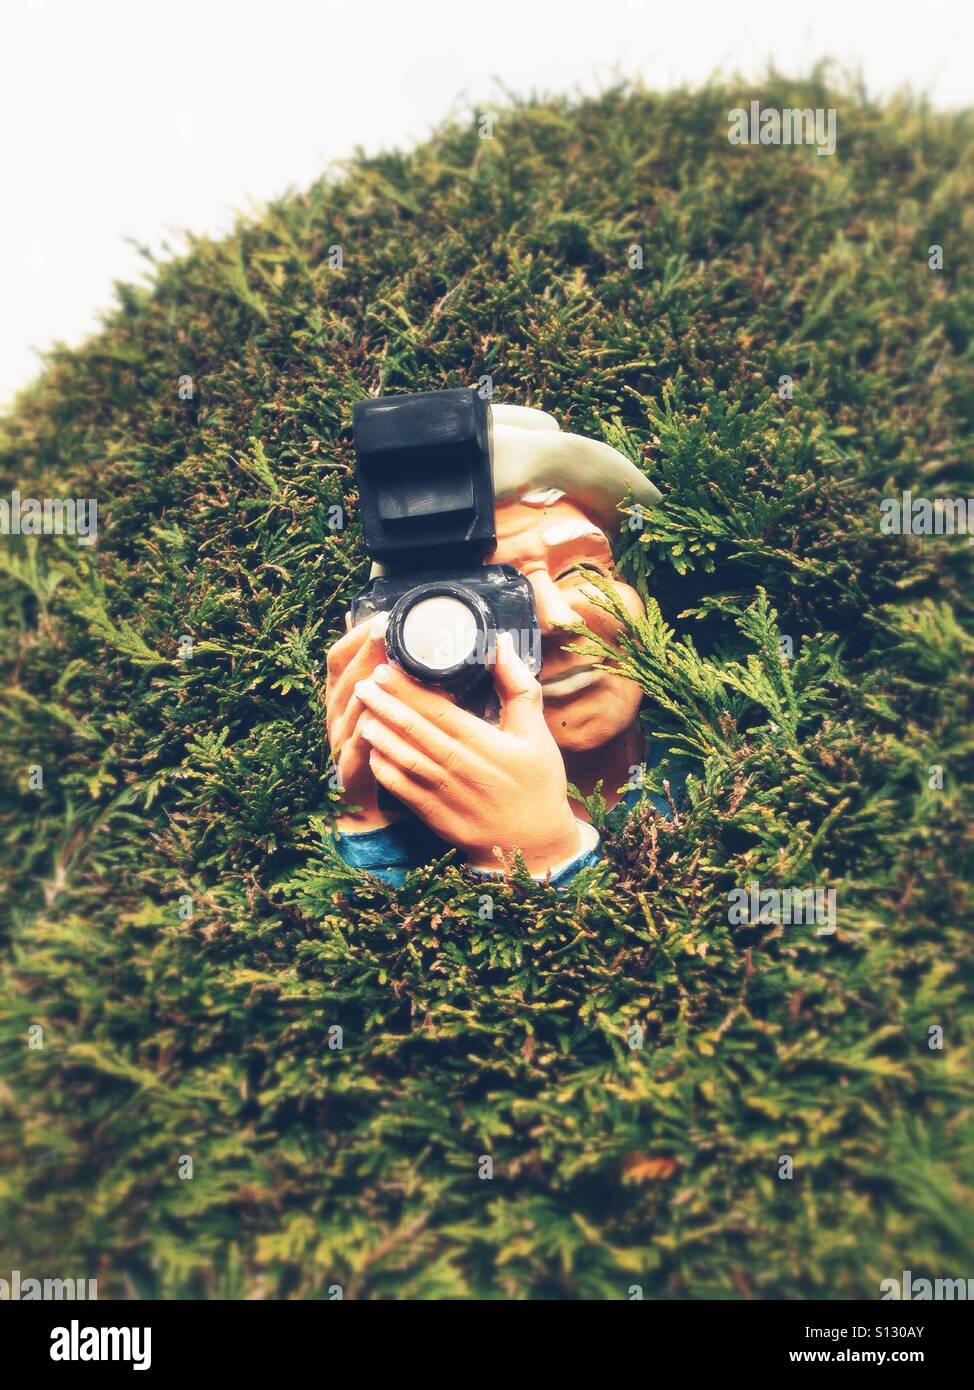 A sculpture of a photographer peeping from a green shrub Stock Photo